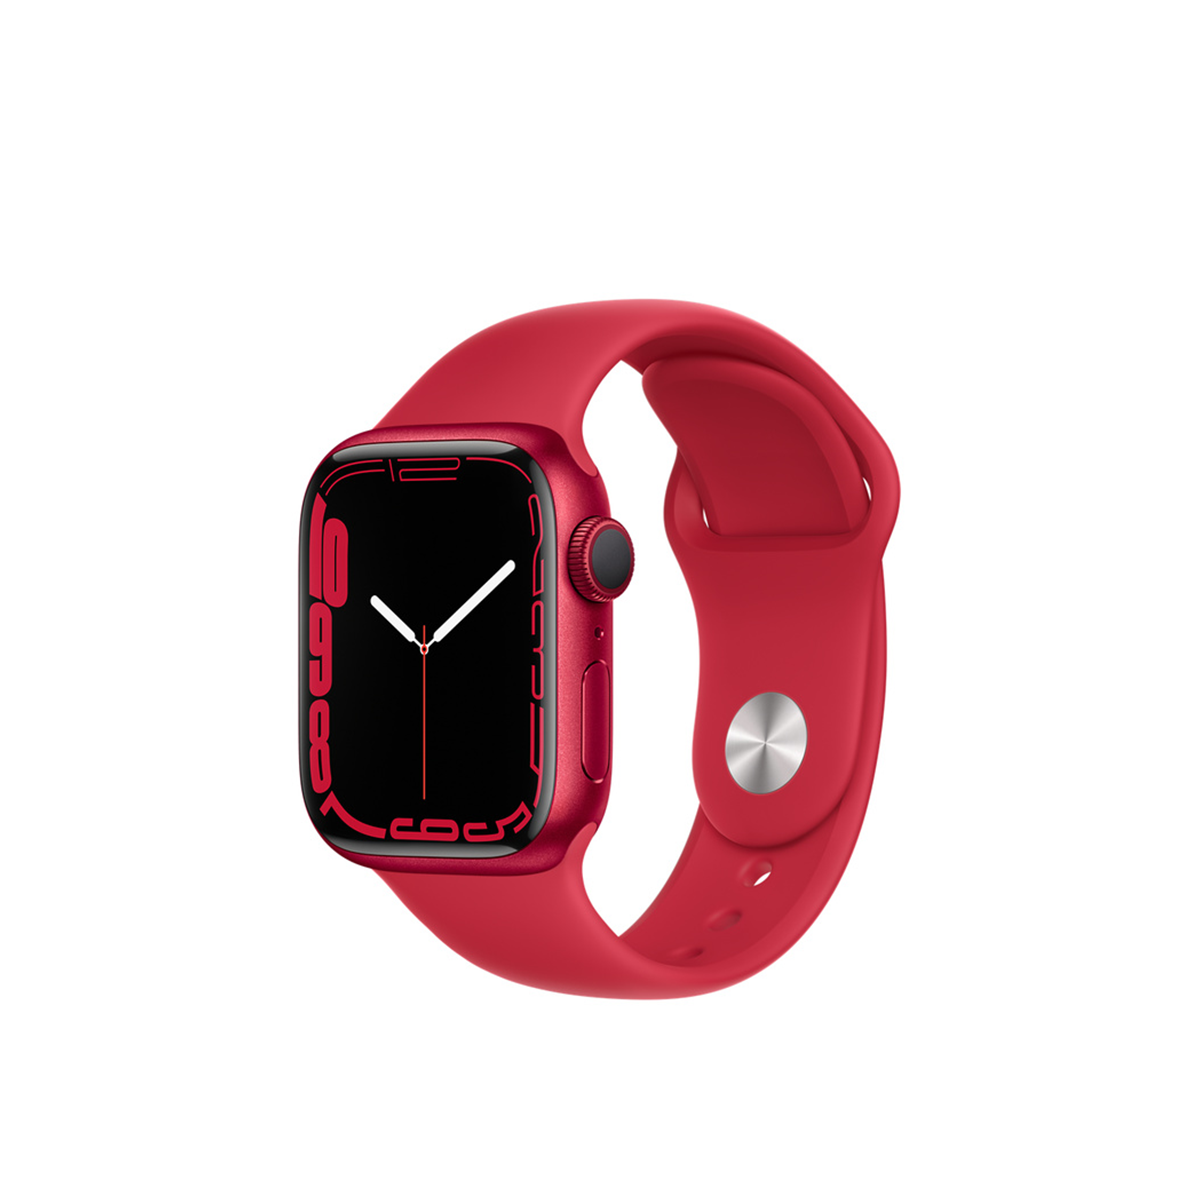  Apple Watch Series 7 GPS, 41mm (PRODUCT)RED Aluminium Case with (PRODUCT)RED Sport Band - Regular 